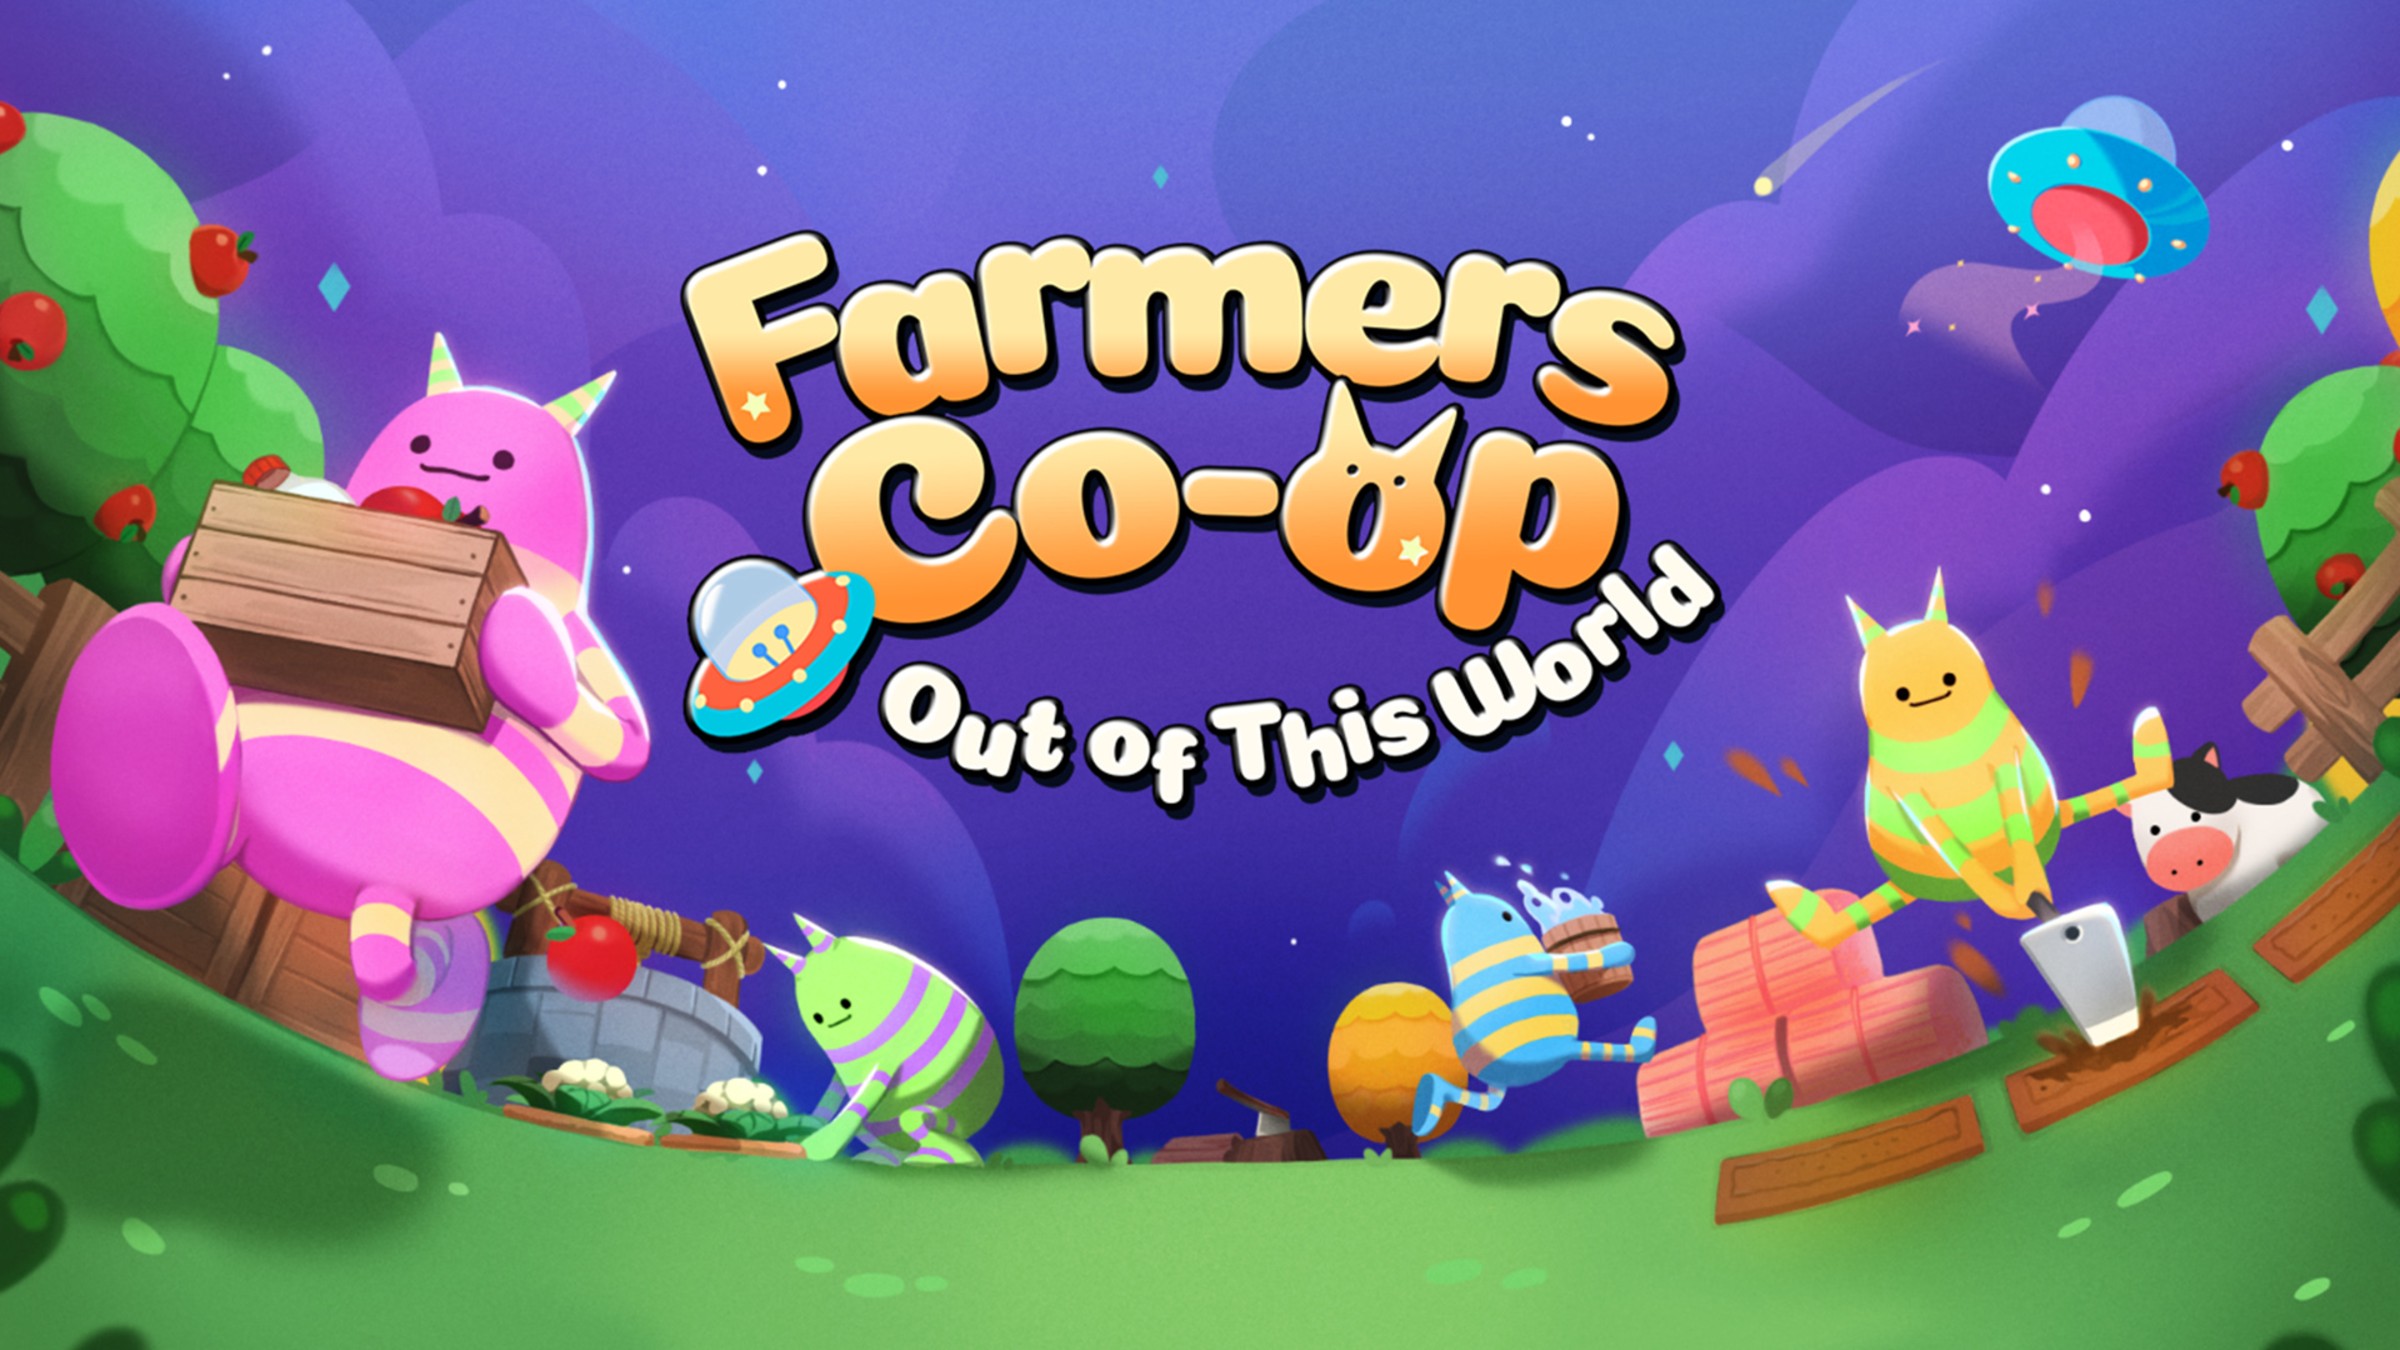 Farmers Co-op Out of This World for Nintendo Switch